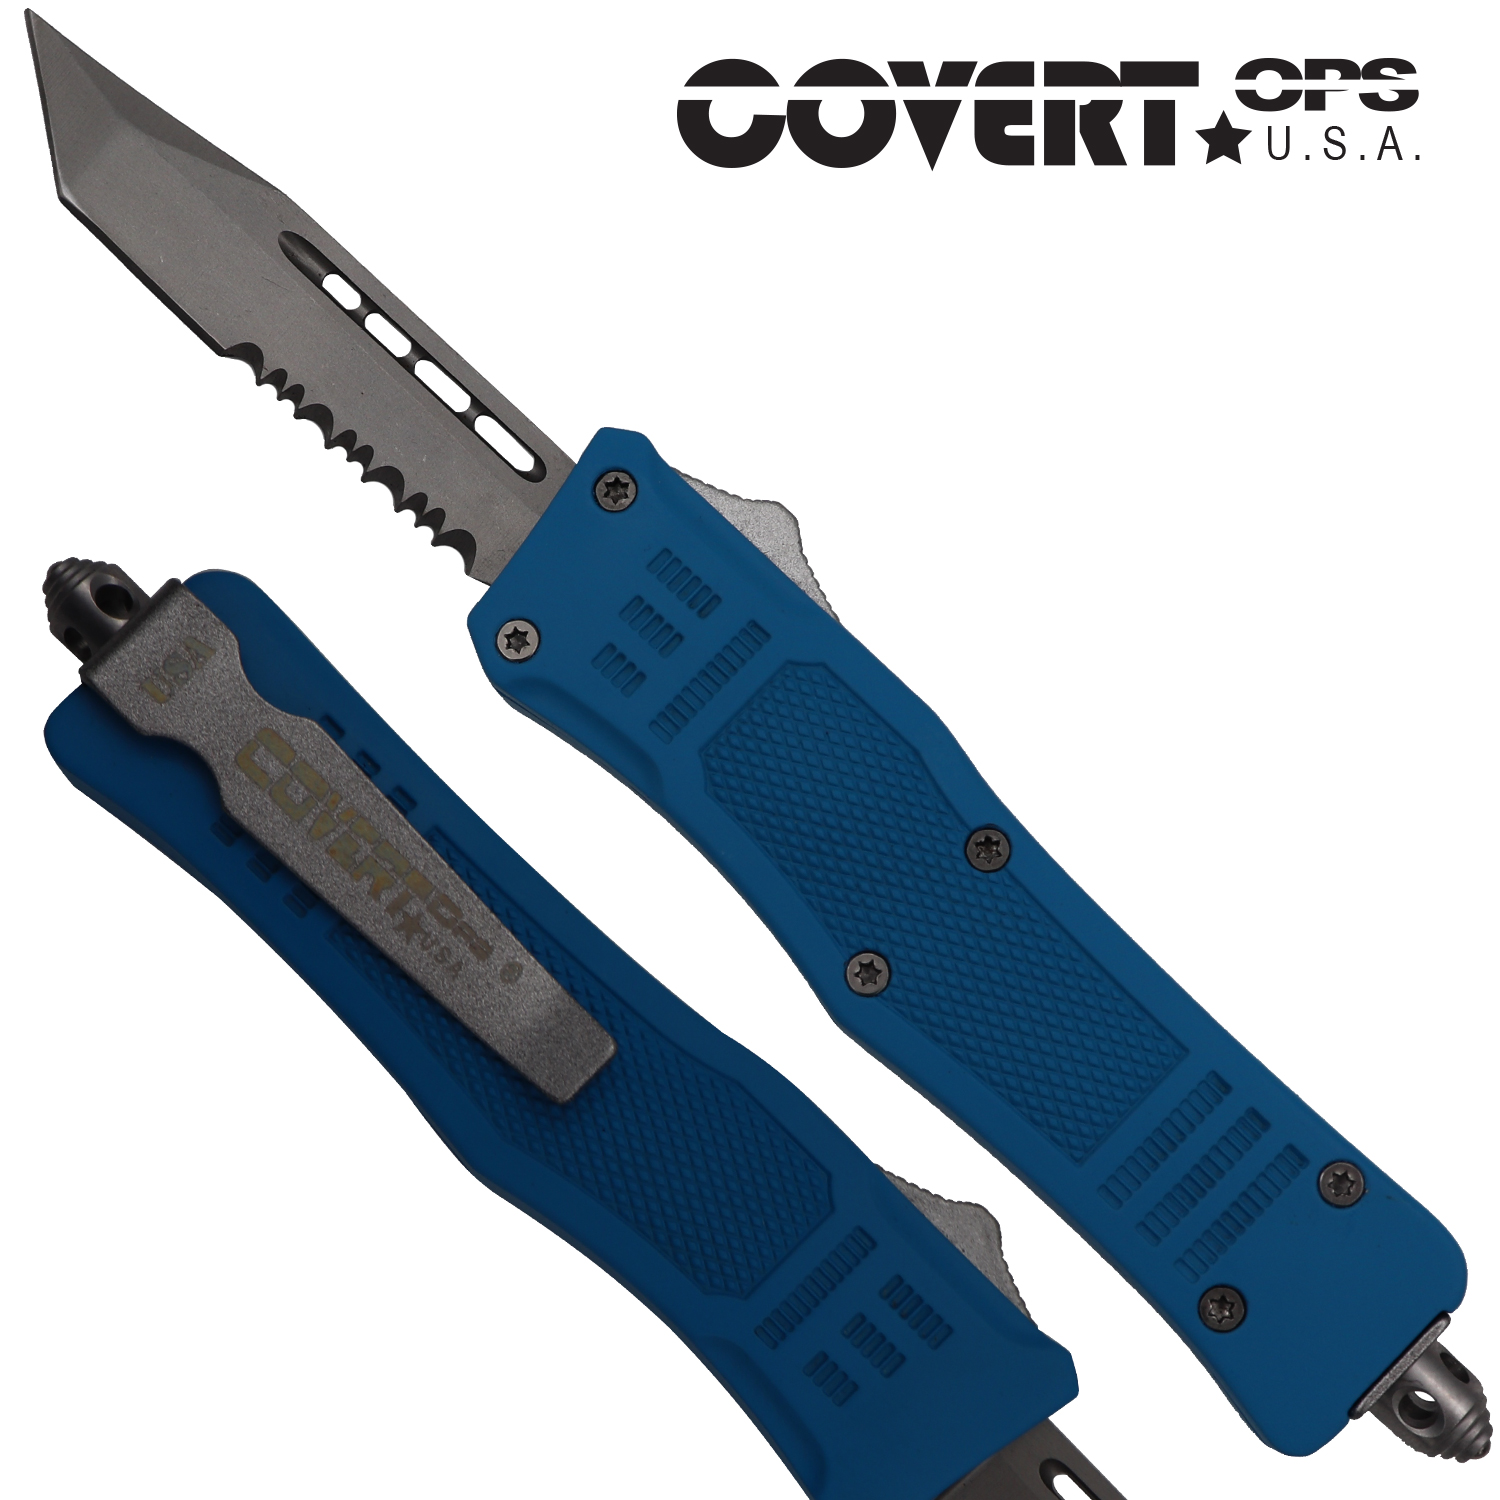 Covert OPS USA OTF Automatic Knife 7 inch overall Blue Handle Silver Tanto D2 Steel Blade